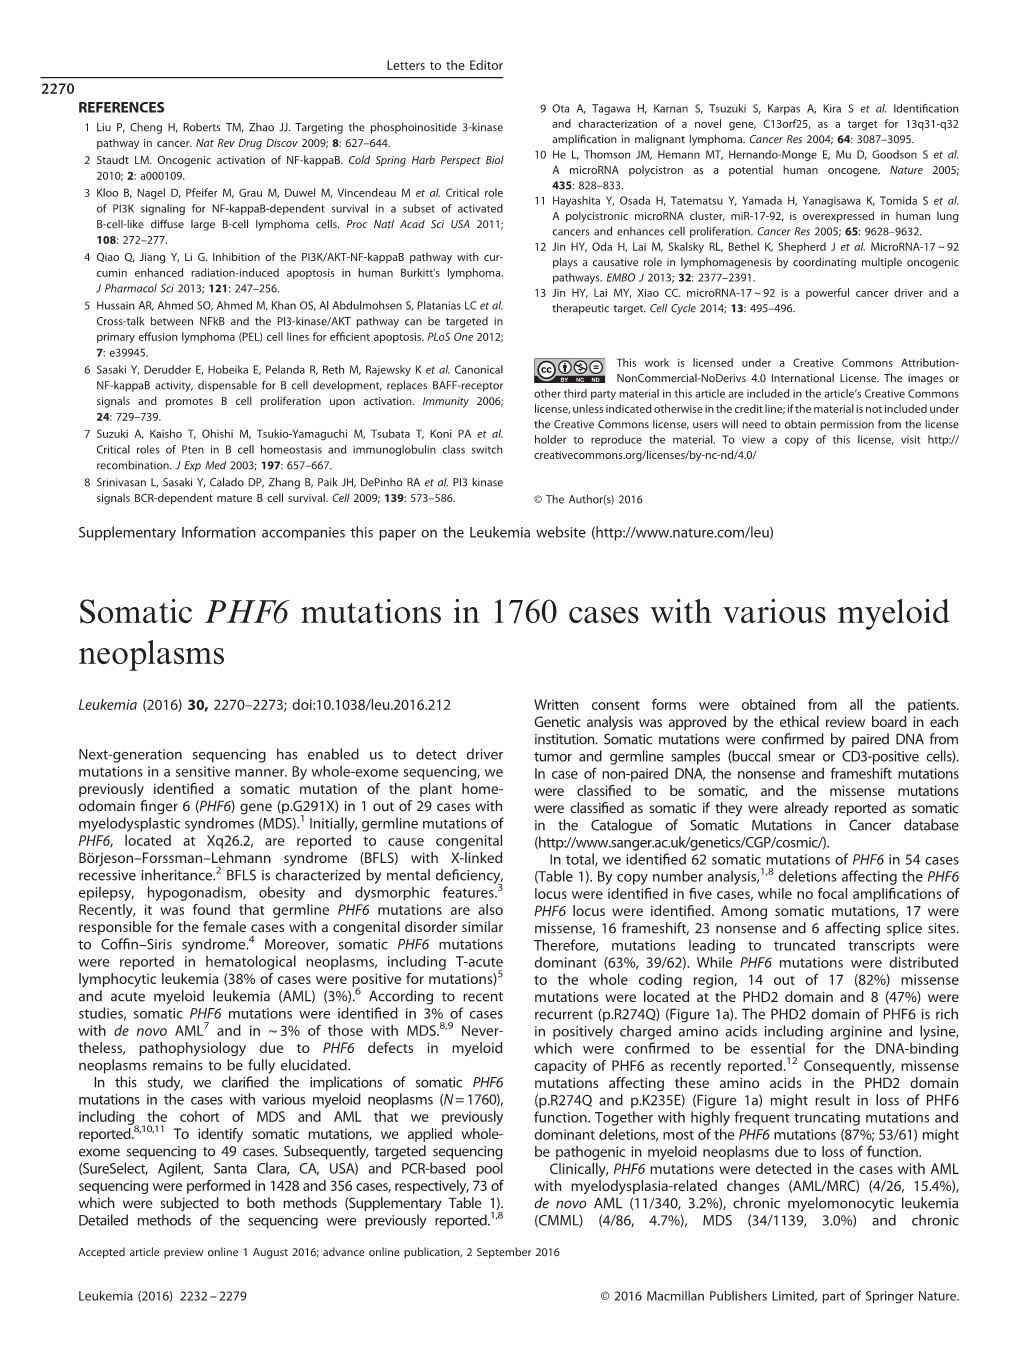 Somatic PHF6 Mutations in 1760 Cases with Various Myeloid Neoplasms